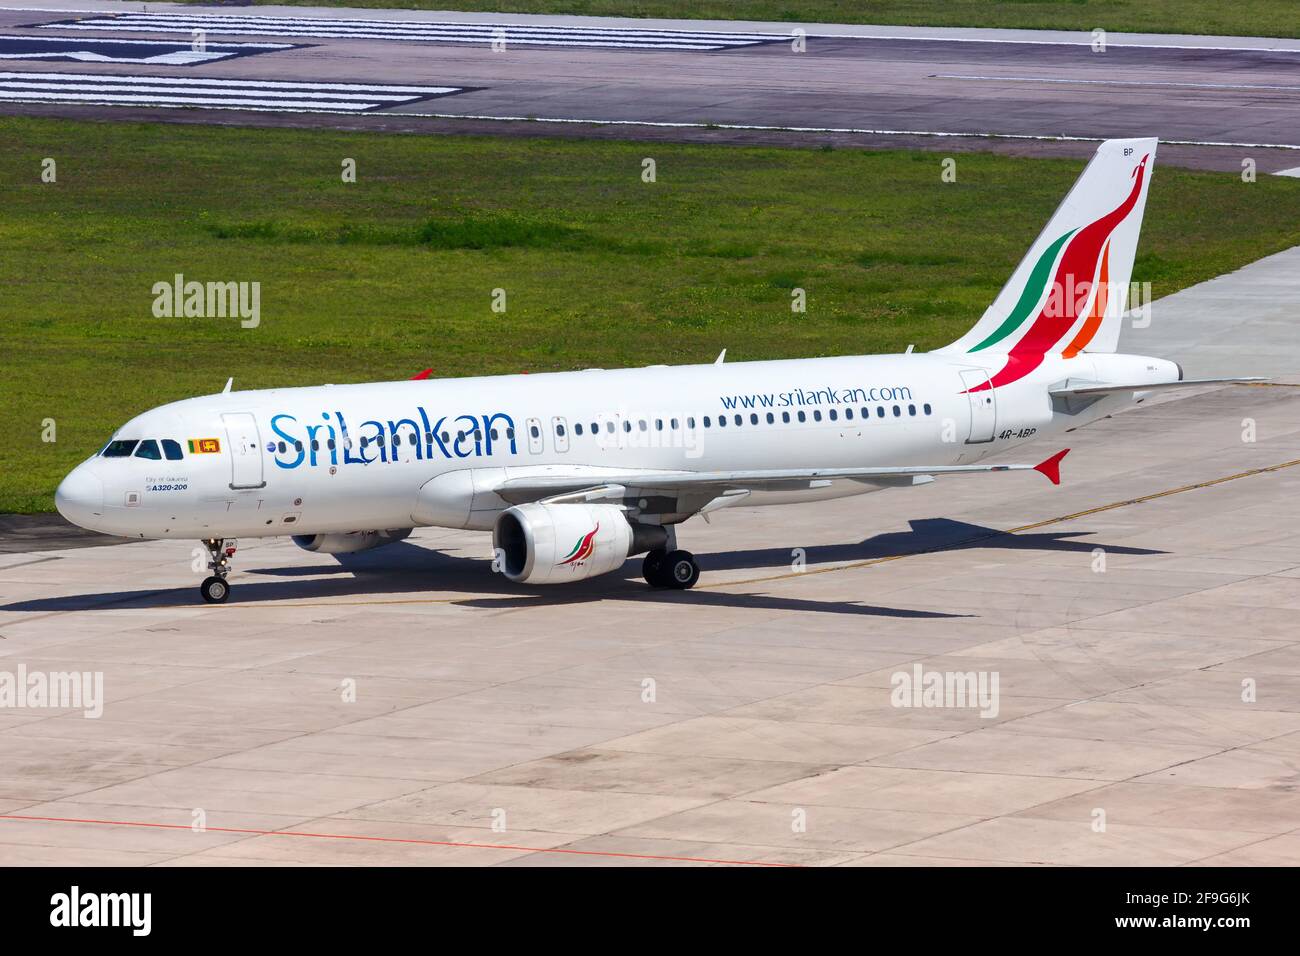 Mahe, Seychelles - November 25, 2017: Air Seychelles Airbus A320 airplane at Seychelles International Airport (SEZ) in the Seychelles. Airbus is a Eur Stock Photo